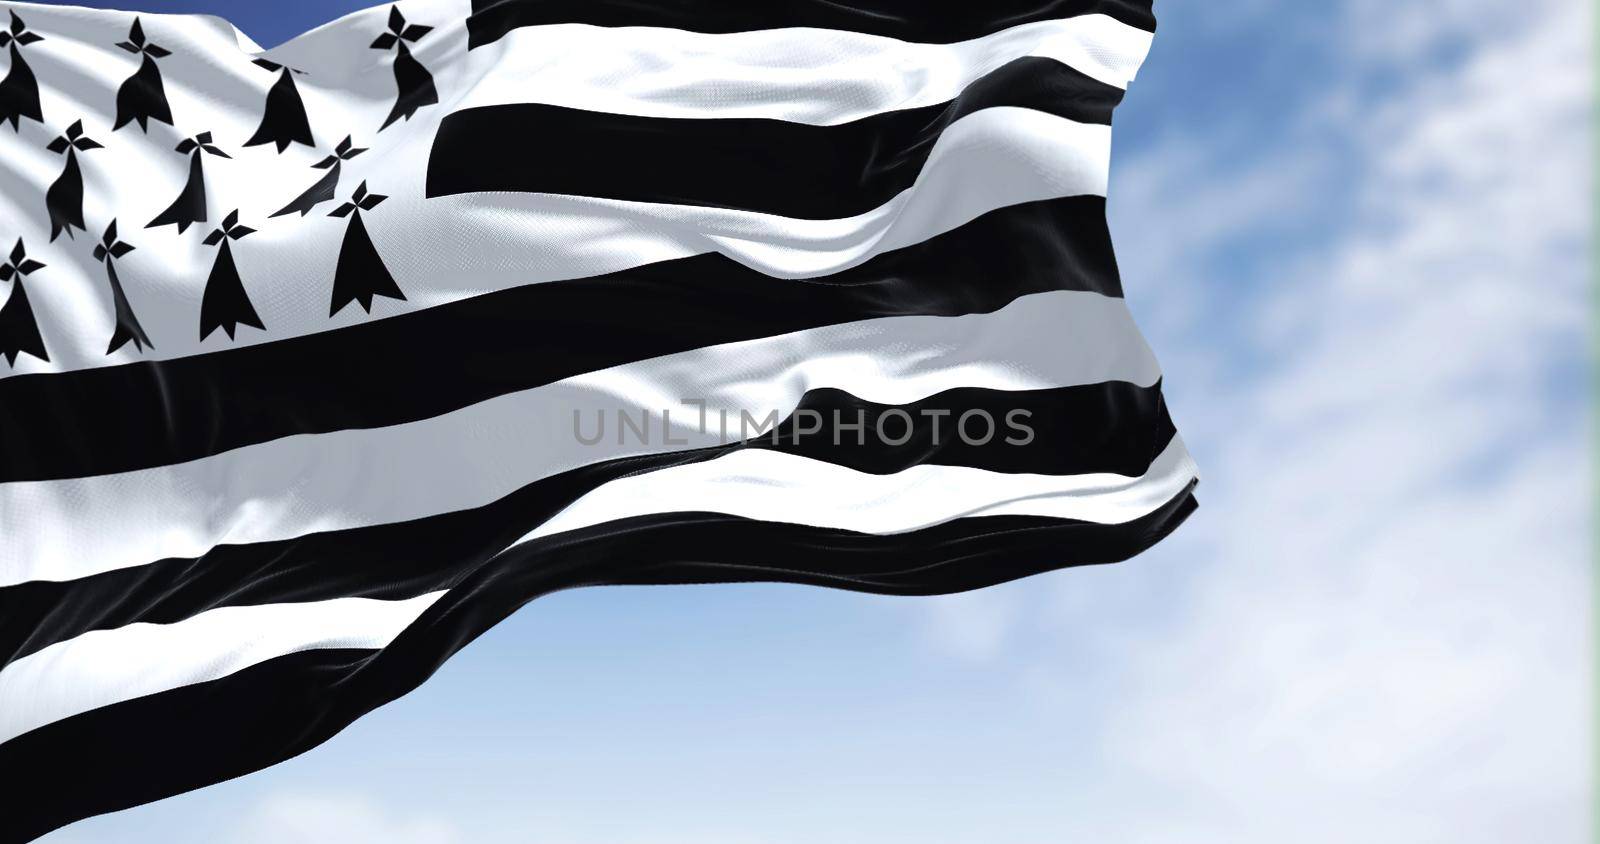 View of the Brittany flag waving in the wind on a clear day. Brittany is a peninsula, historical country, and cultural area in the west of France. Selective focus.